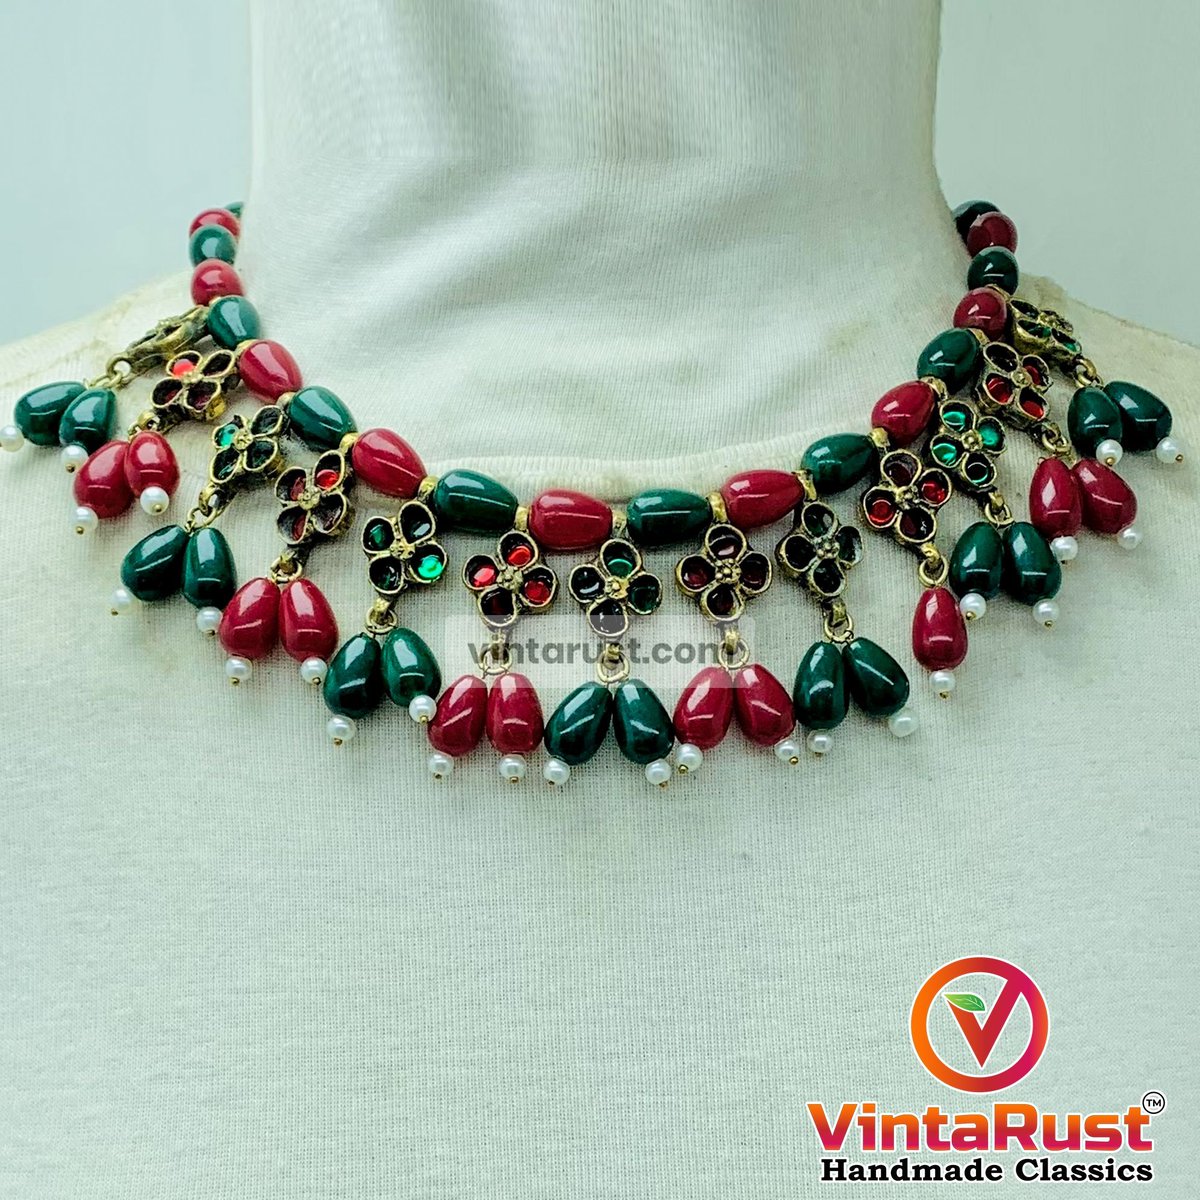 Red and Green Beaded Statement Choker Necklace.

Shop Now:
buff.ly/3F70DSk

#vintarust #jewelry #handmadejewelry #customjewelry #vintagejewelry #handmade #pearls #pearljewelry #jewelrydesign #diamonds #necklace #pearljewellery #jewelrylover #jewerlyblogger #pearl #choker